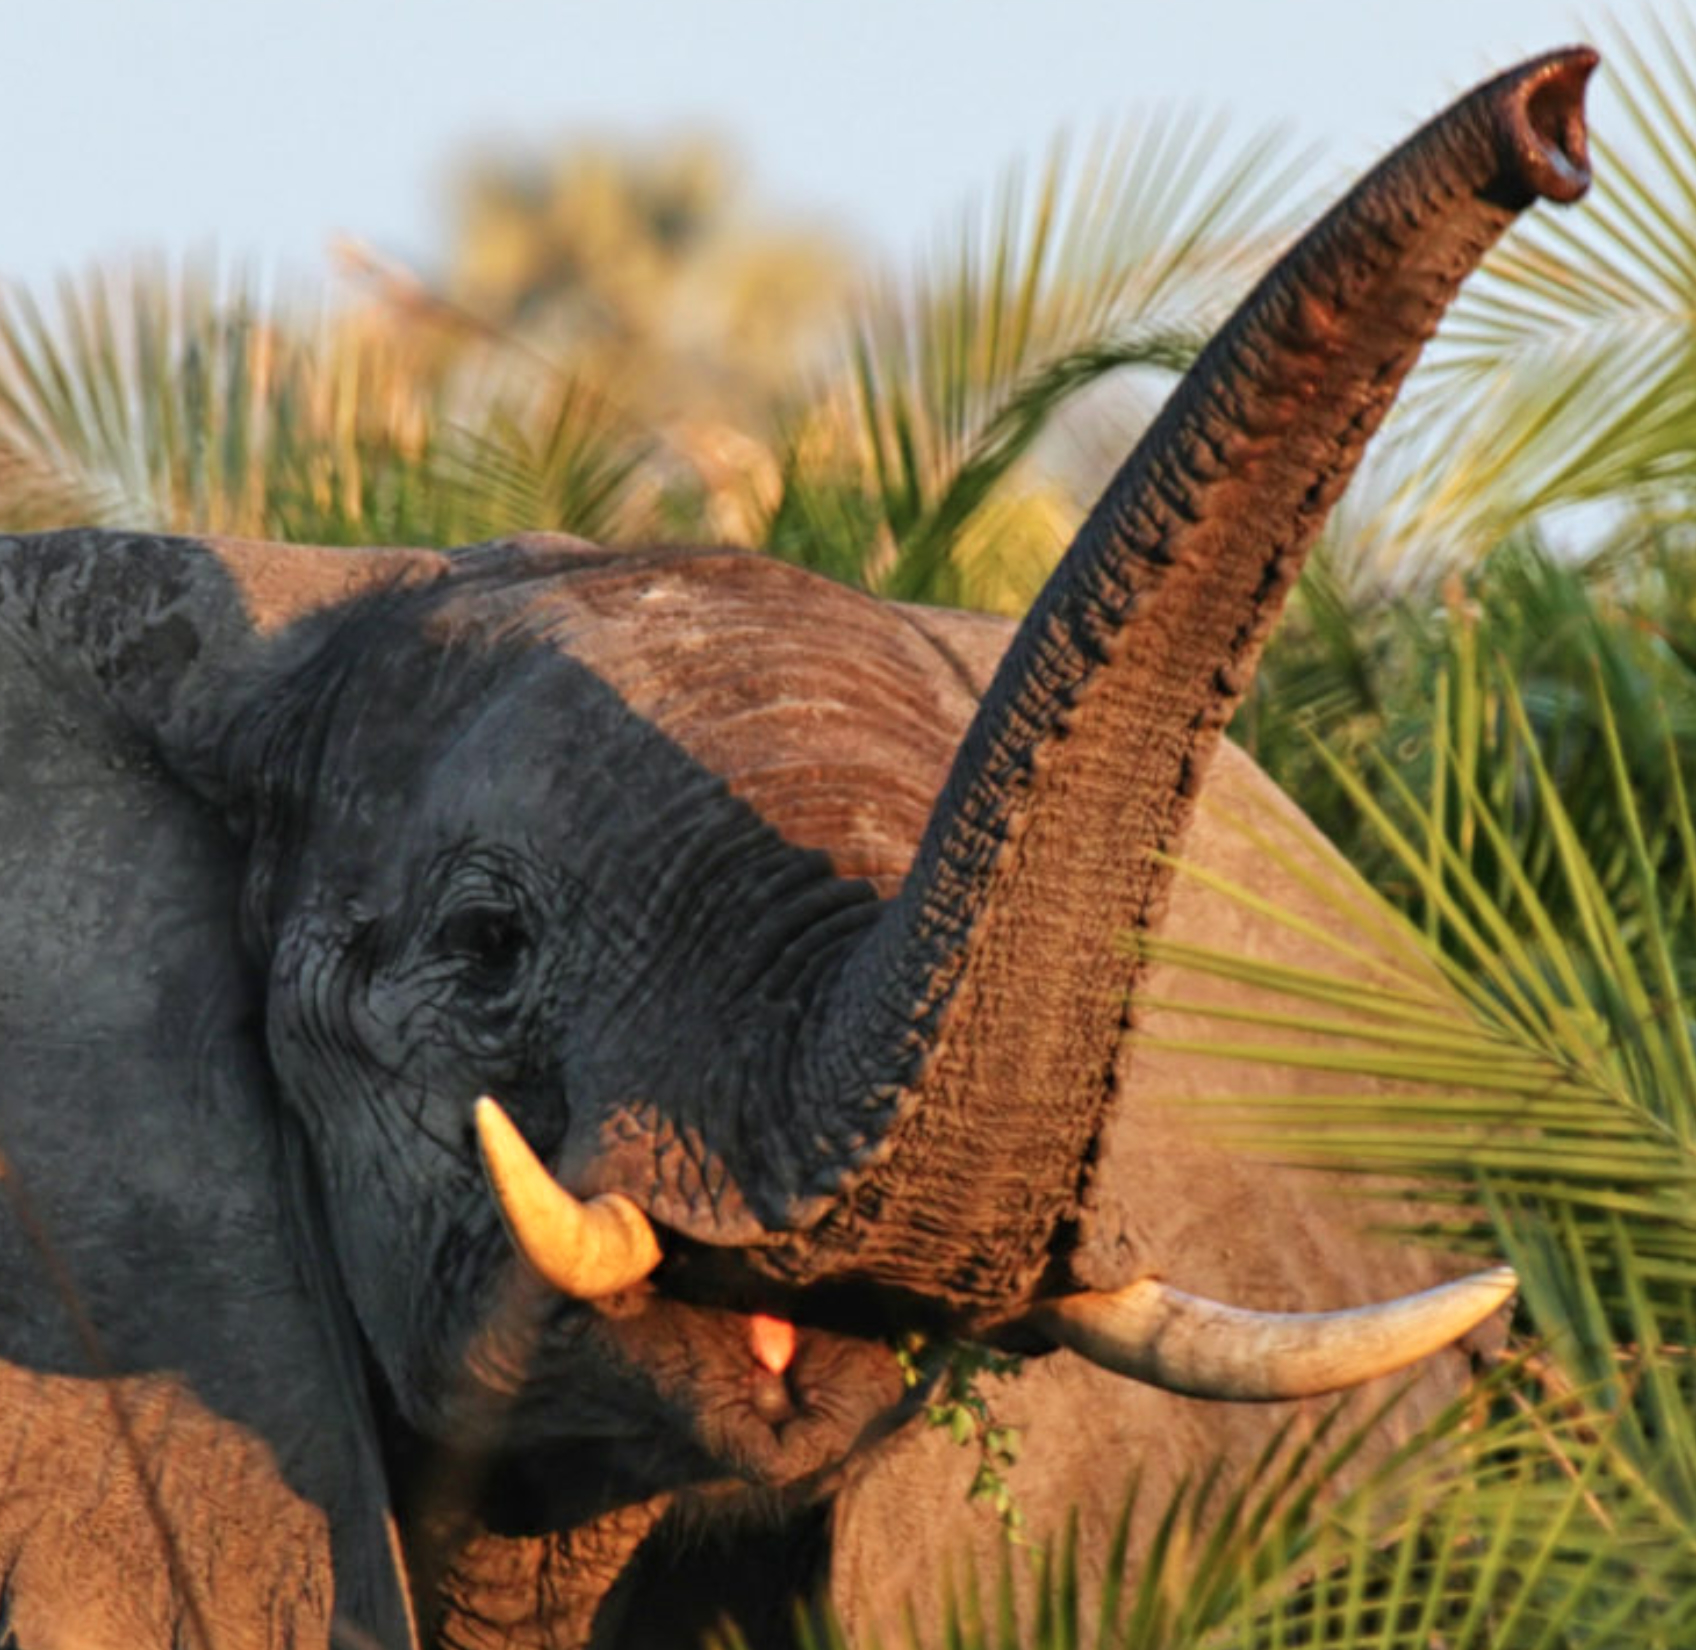 See Elephants on escorted tours of Africa